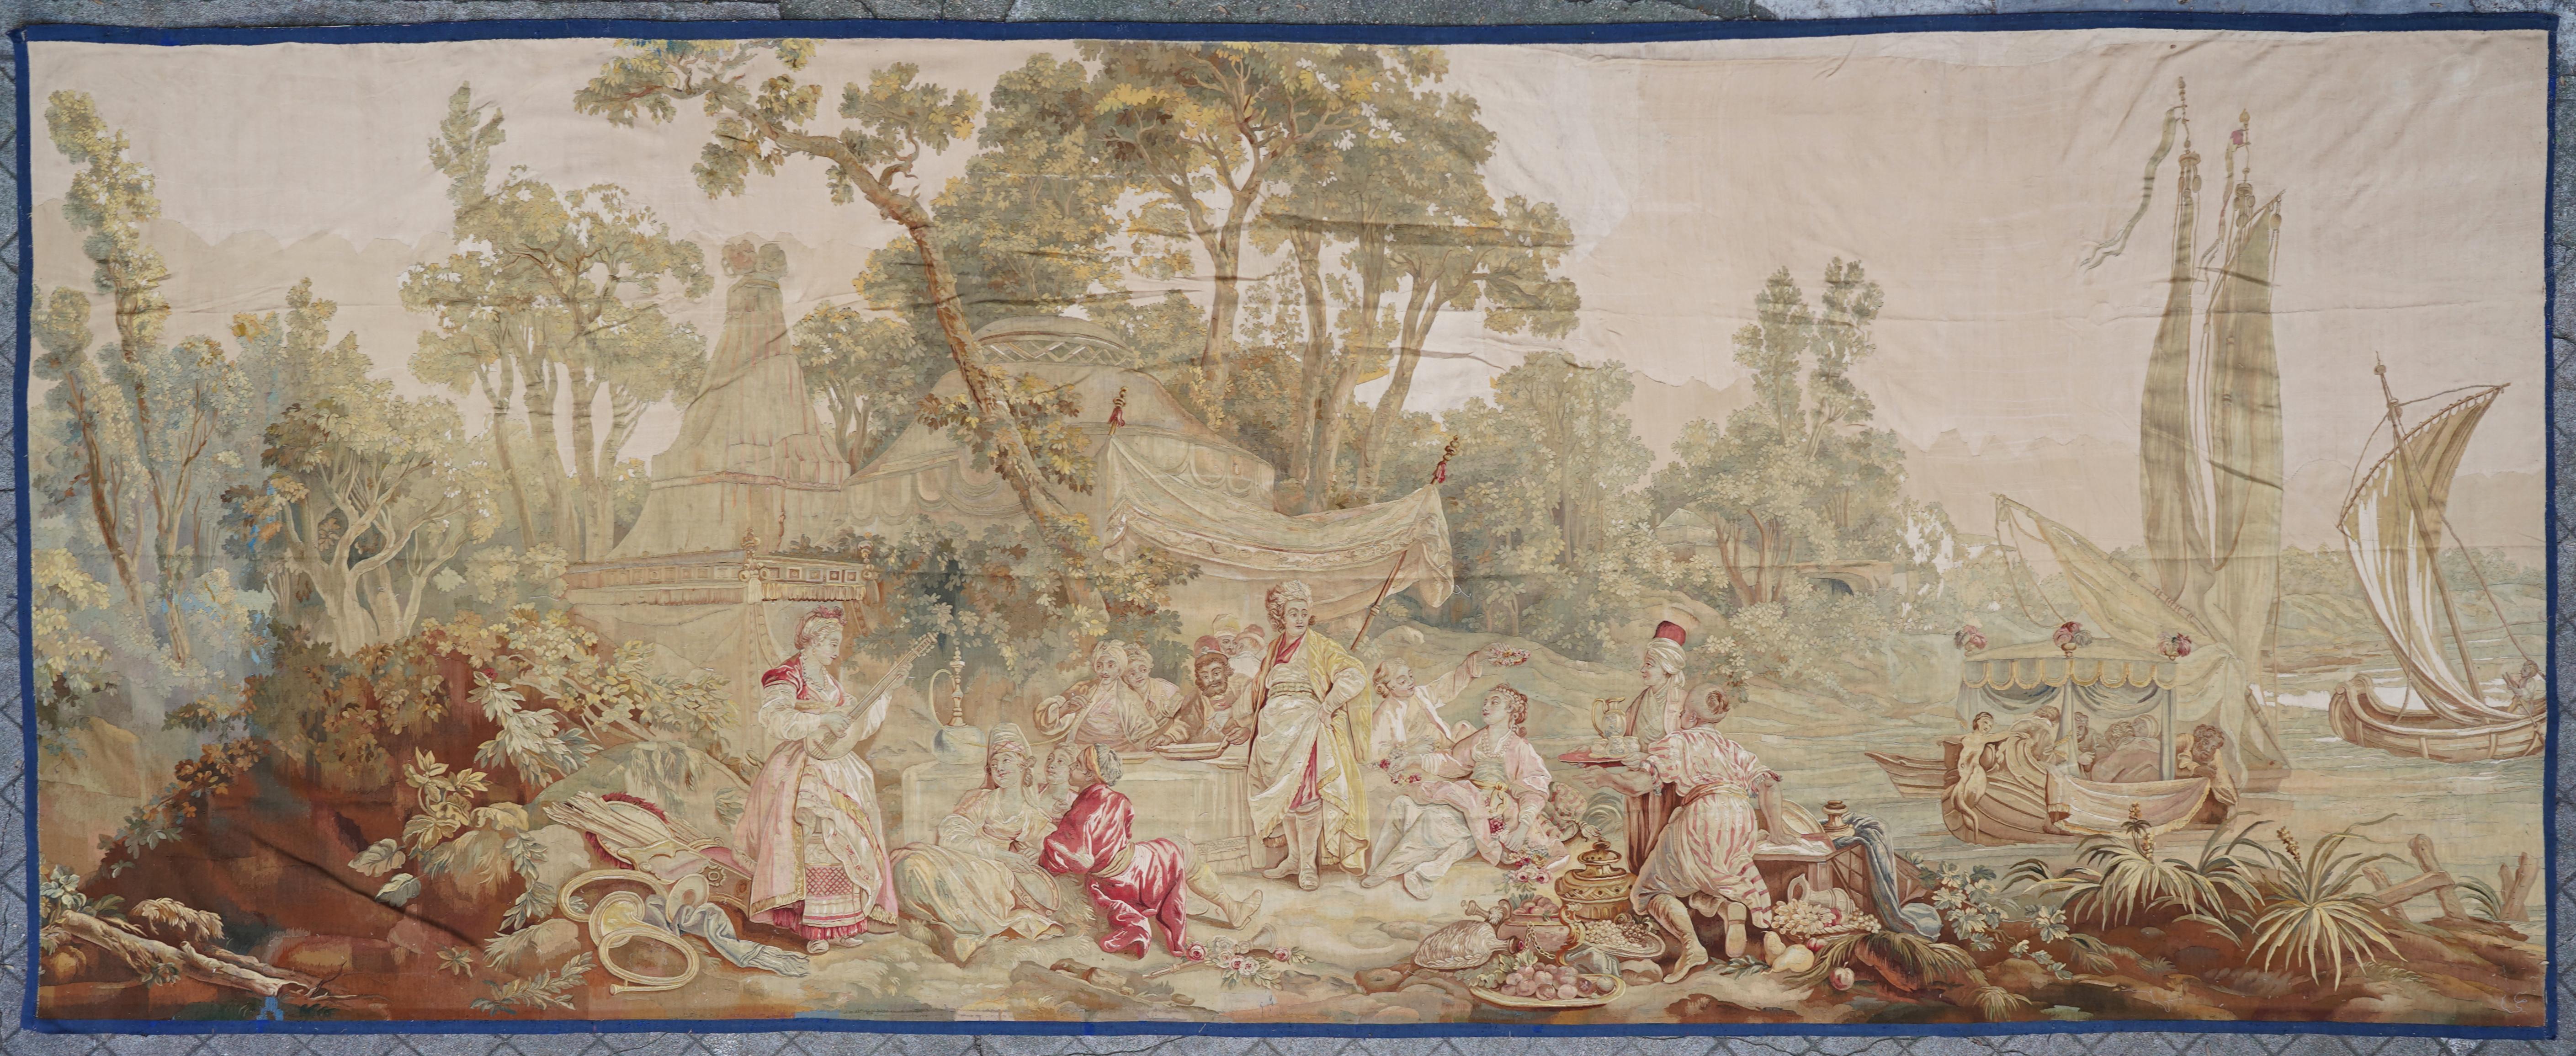 Beautiful wool and silk tapestry representing a banquet of a Pasha. While the guests eat, servants bring the dishes and musicians entertain the assembly.

Tapestries were used to richly decorate a house and keep the heat inside a room by